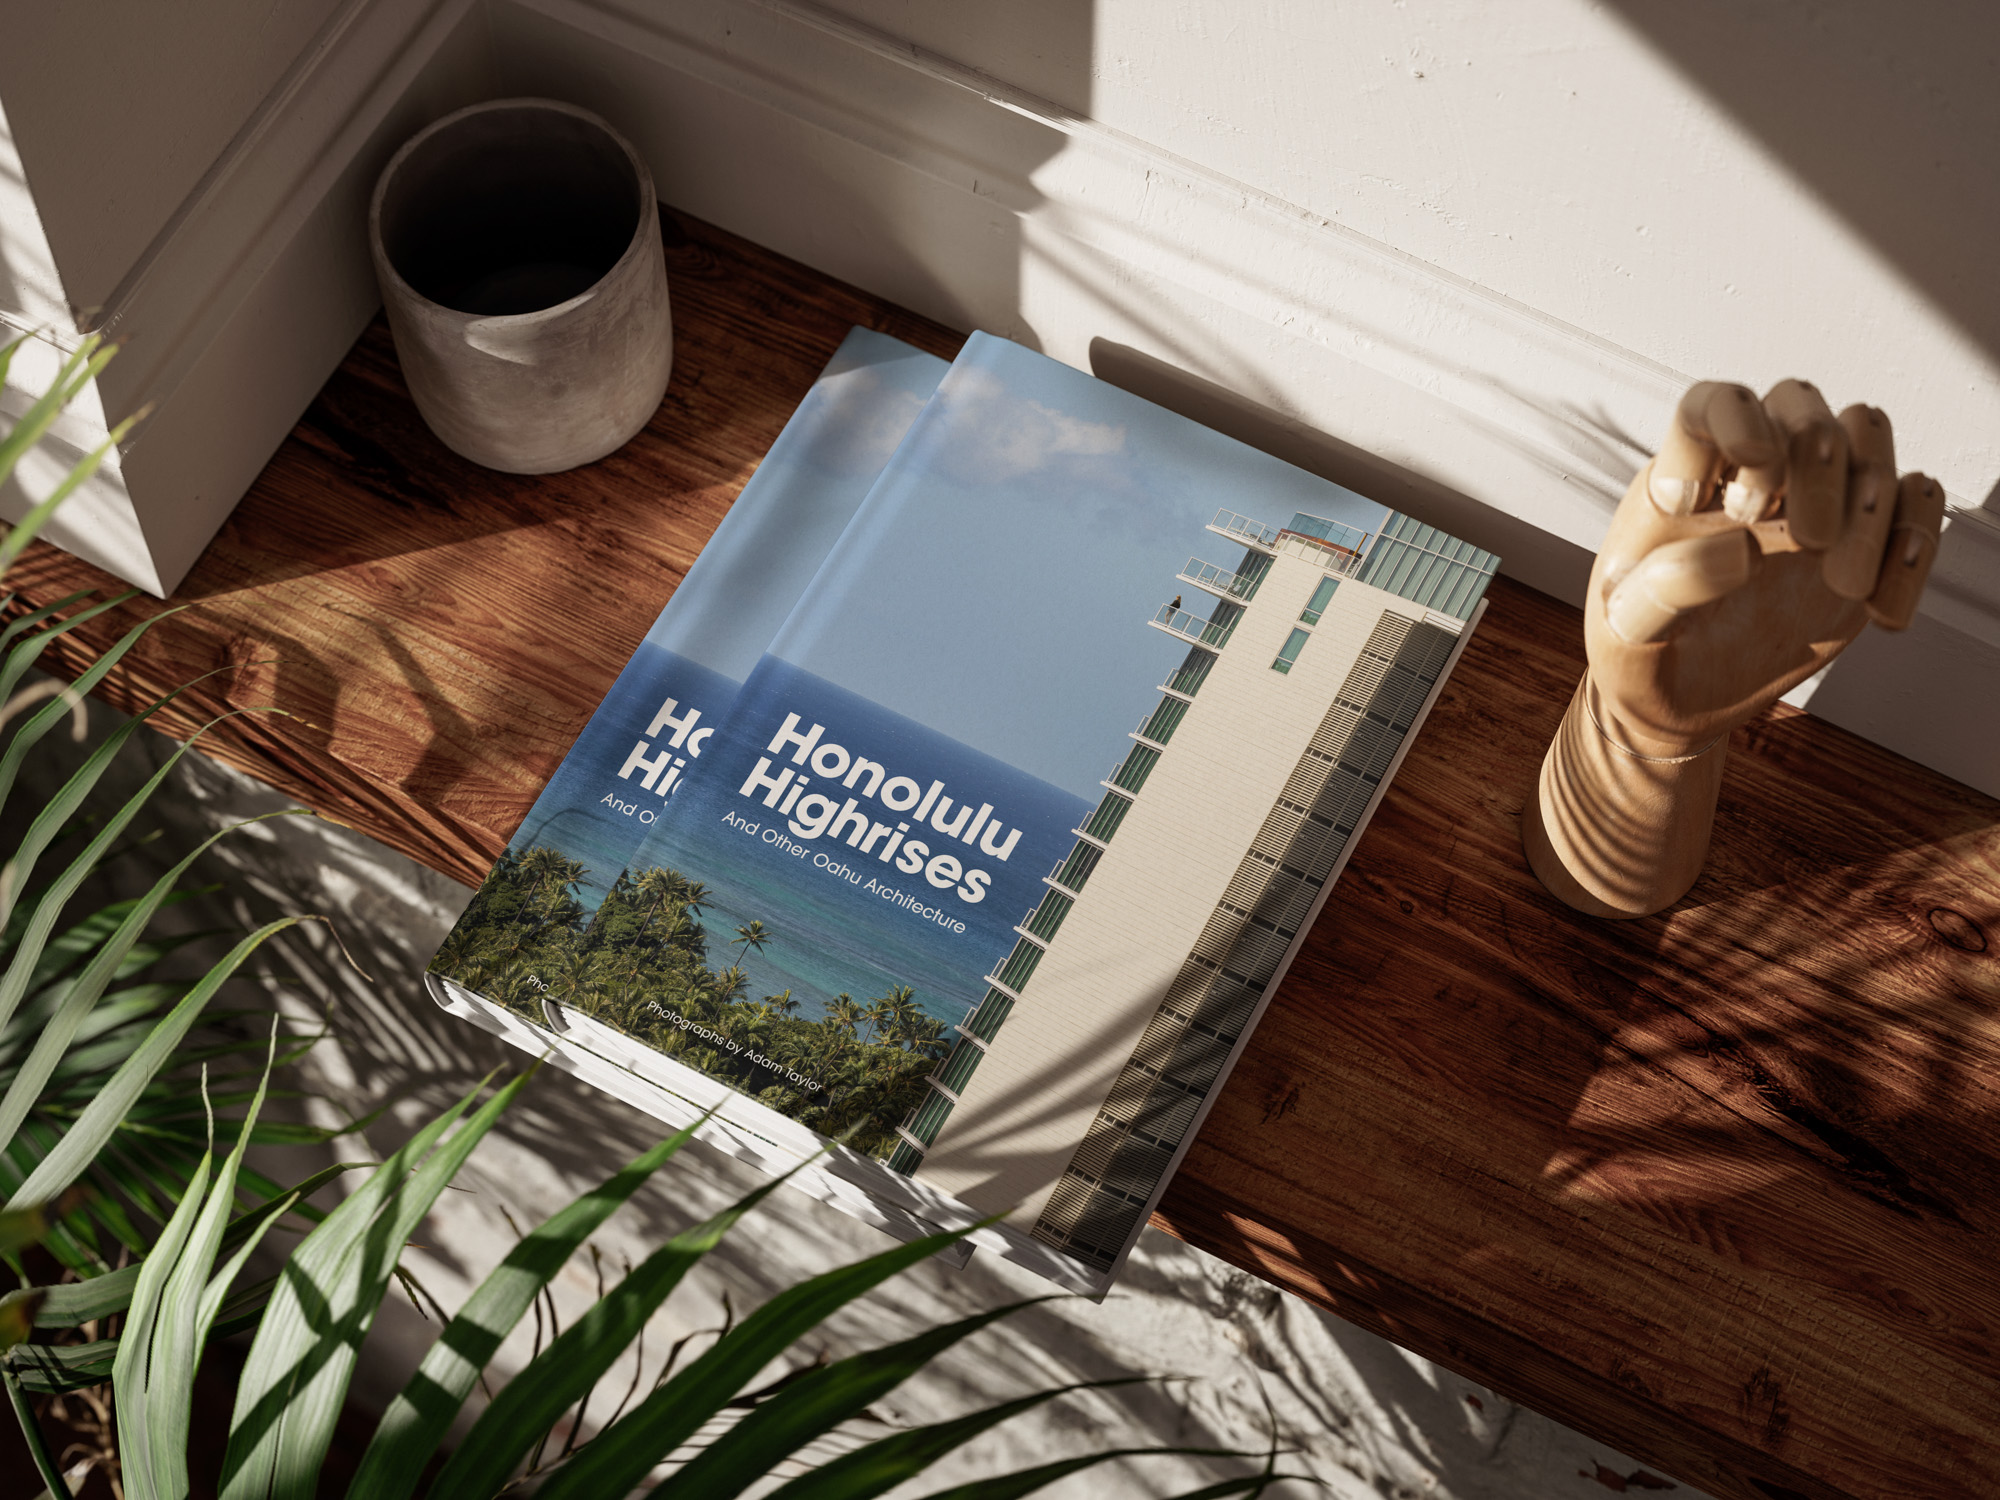 Oahu Hawaii Architecture Photography Book by Adam Taylor